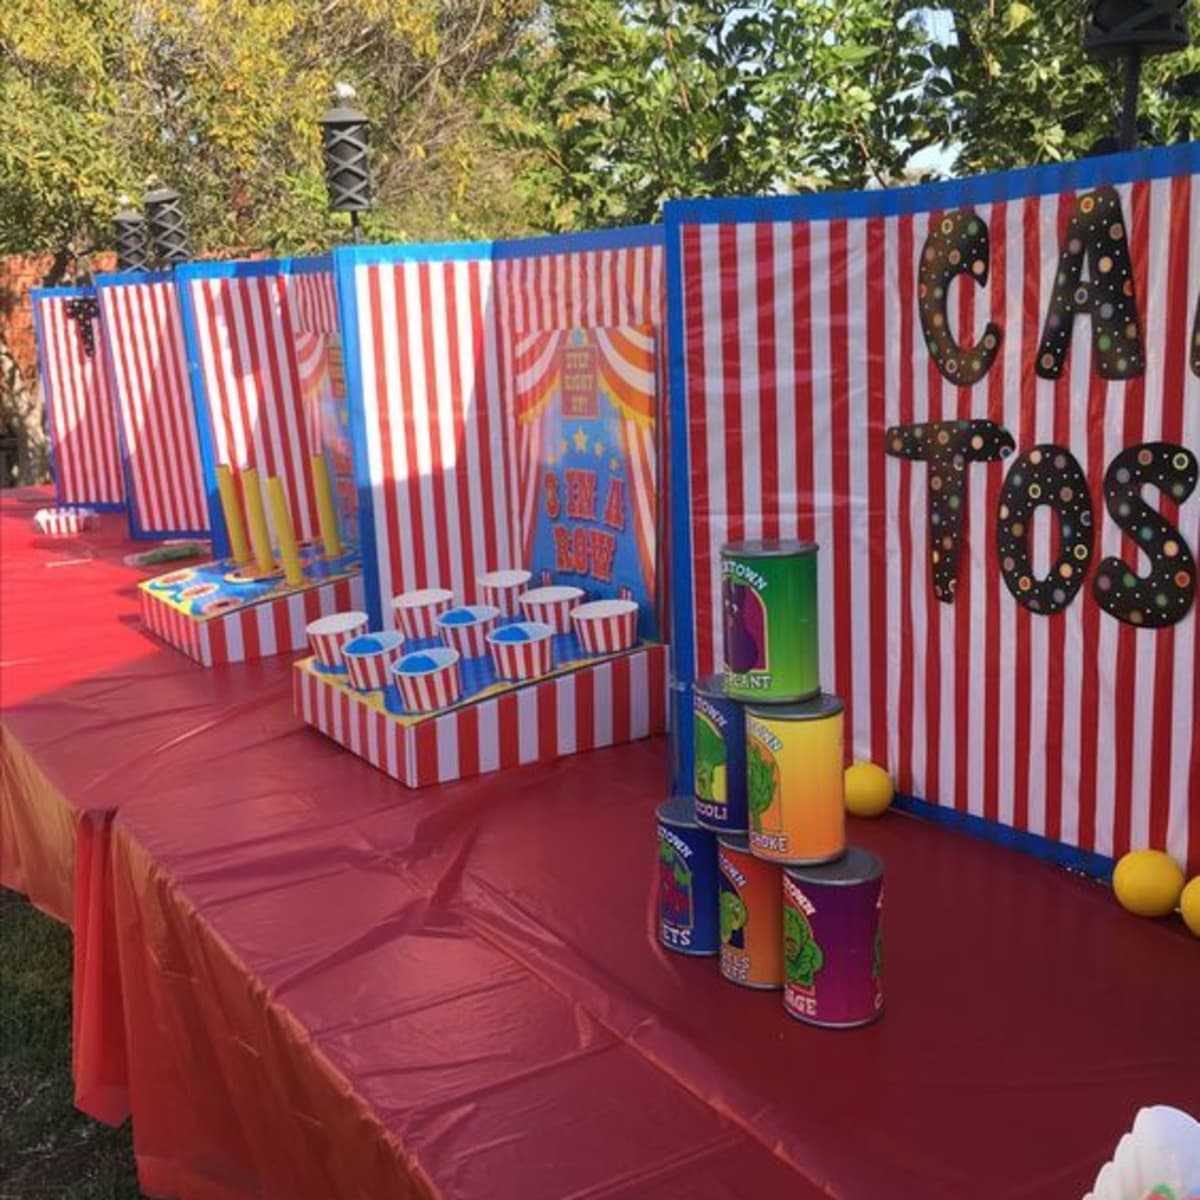 homemade carnival decorations